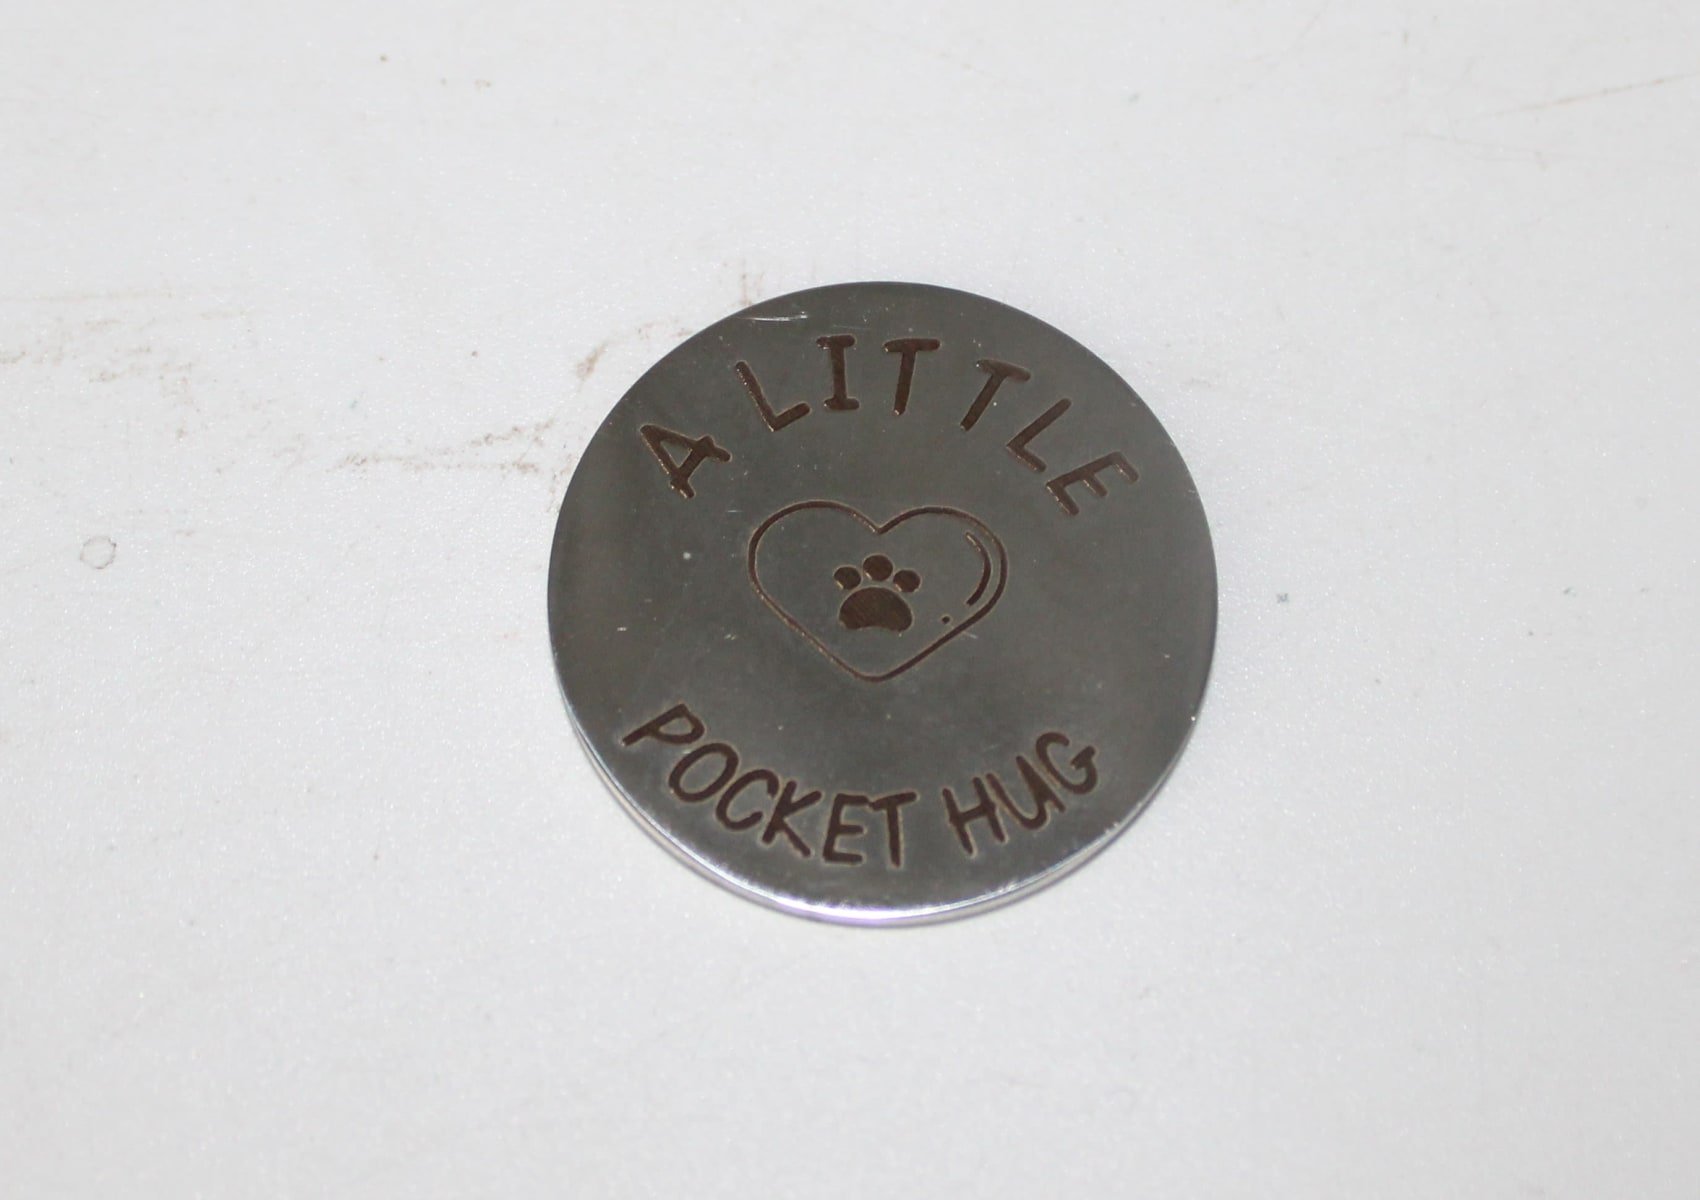 Metal A Little Pocket Hug Disc From Your Pet at Rainbow Bridge